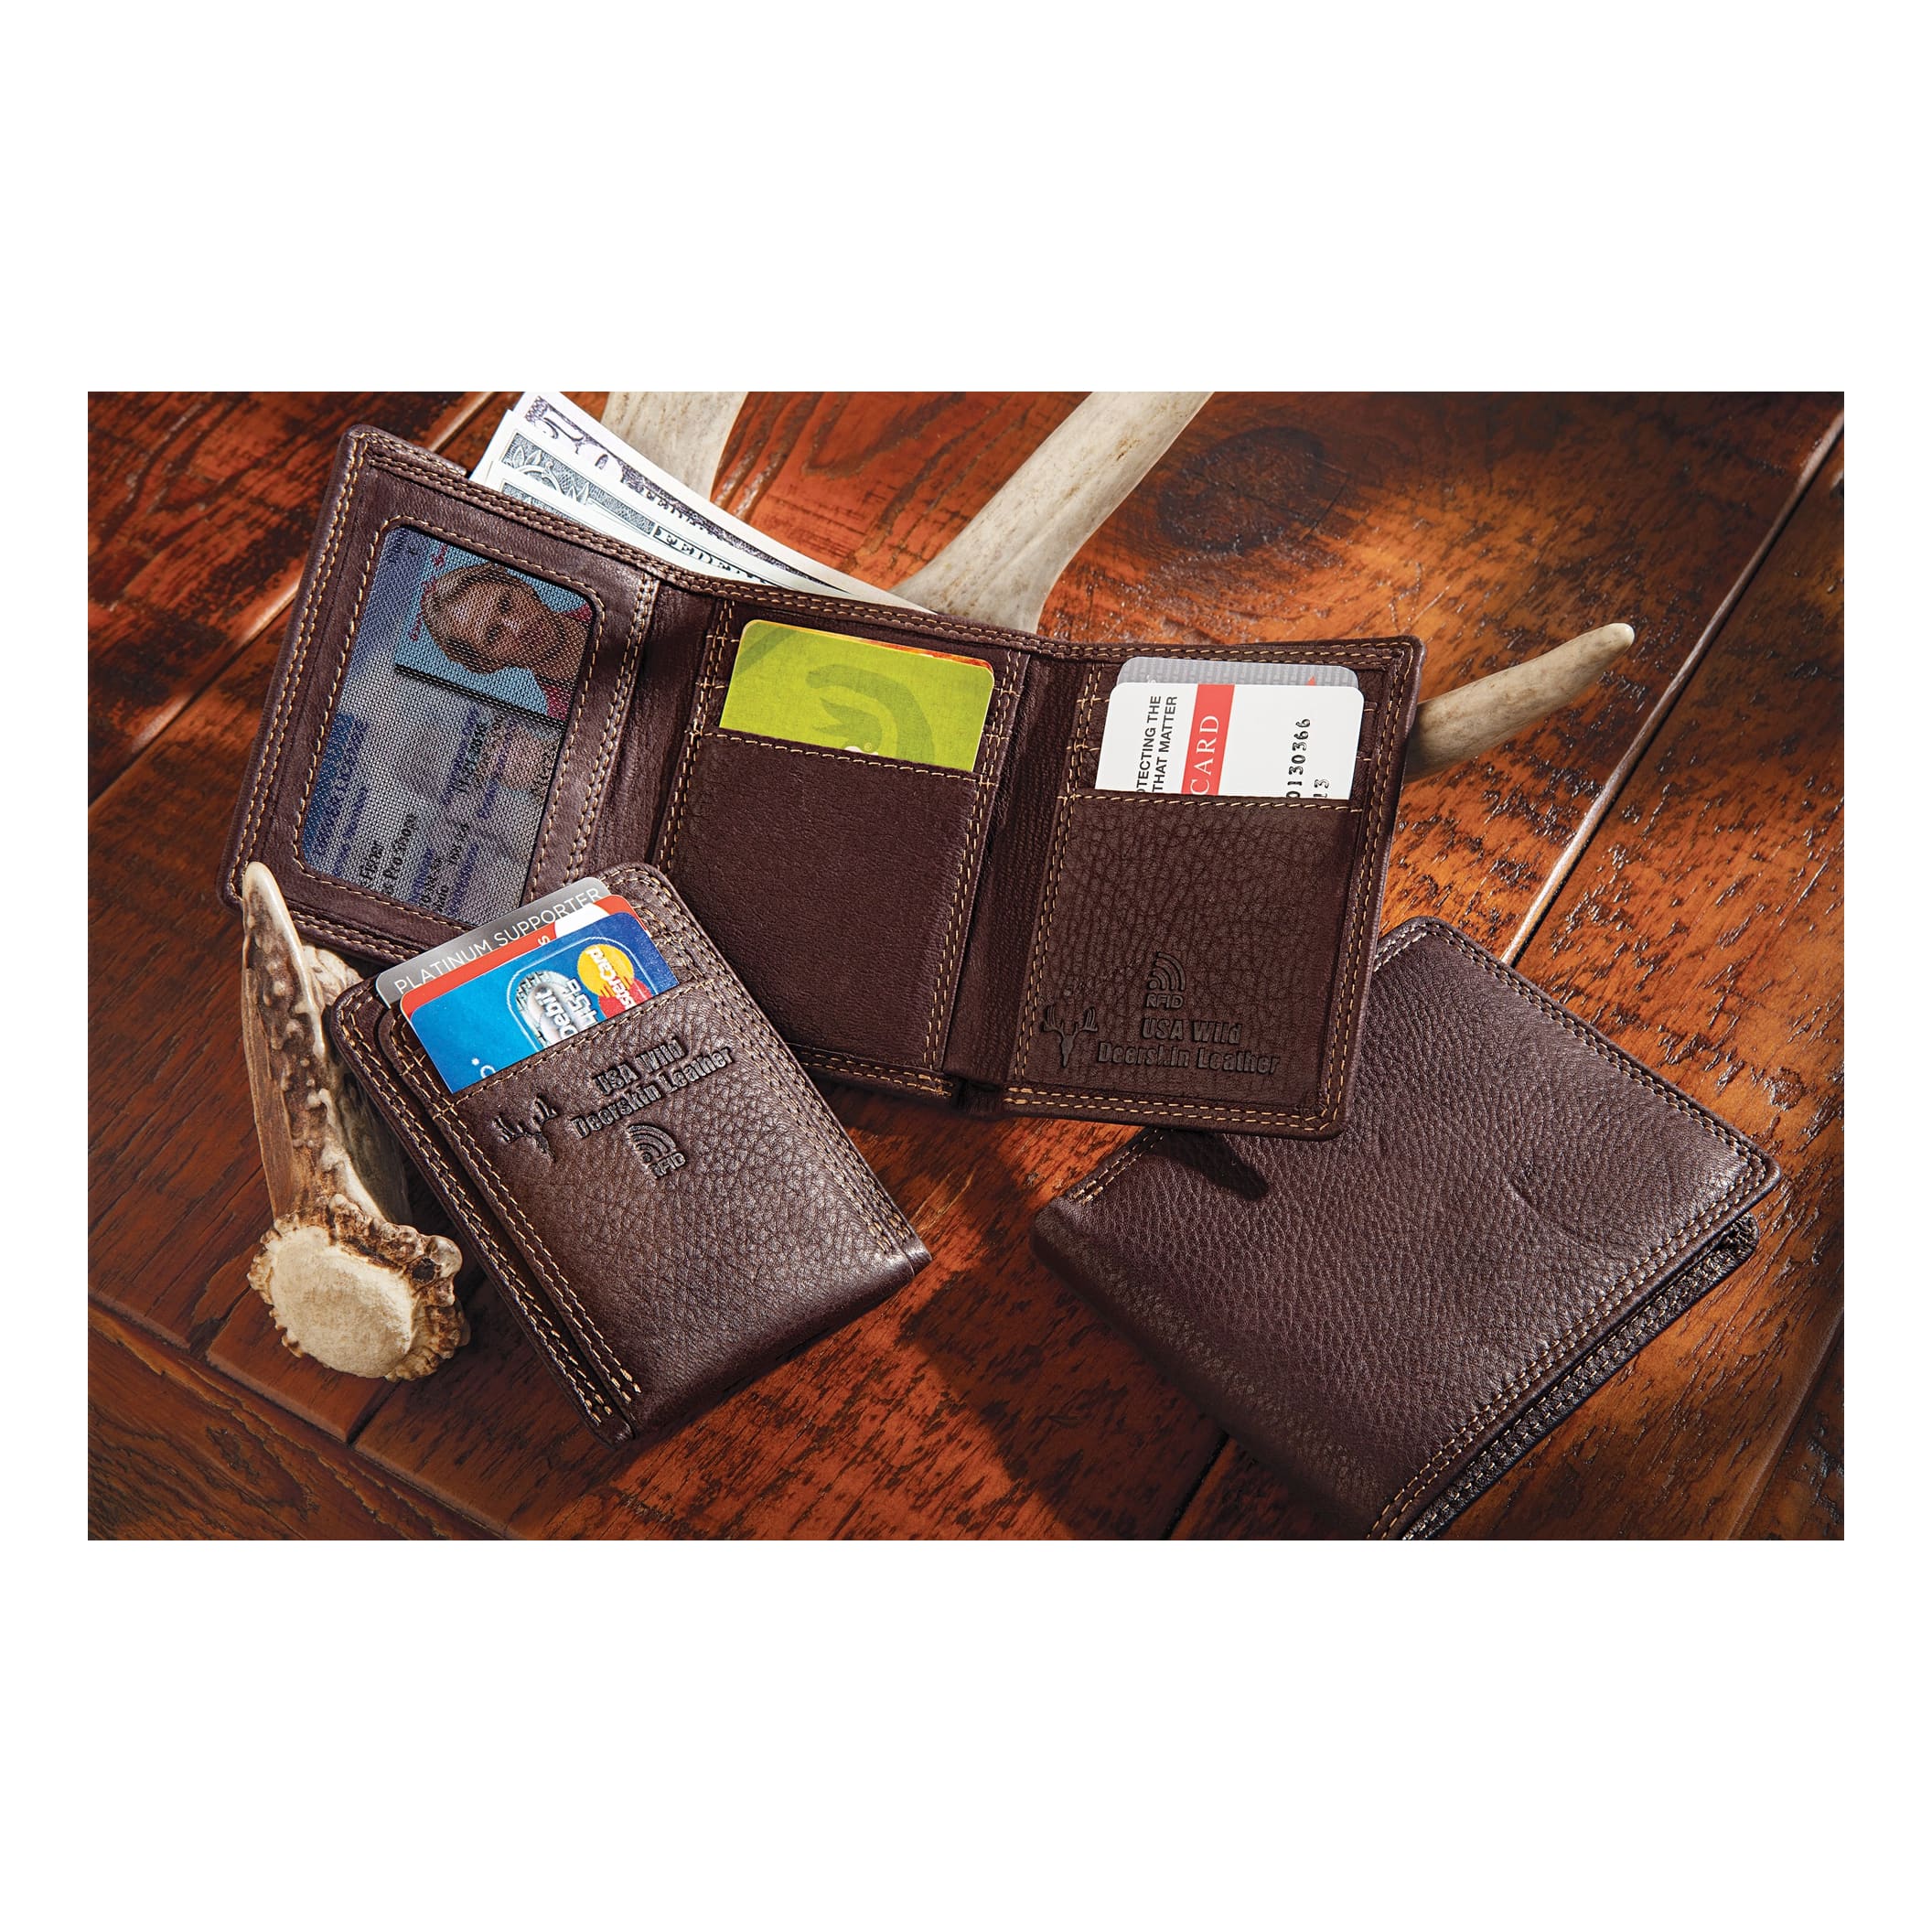 RedHead® Wild Deerskin Leather Front Pocket RFID Wallet (contents not included)